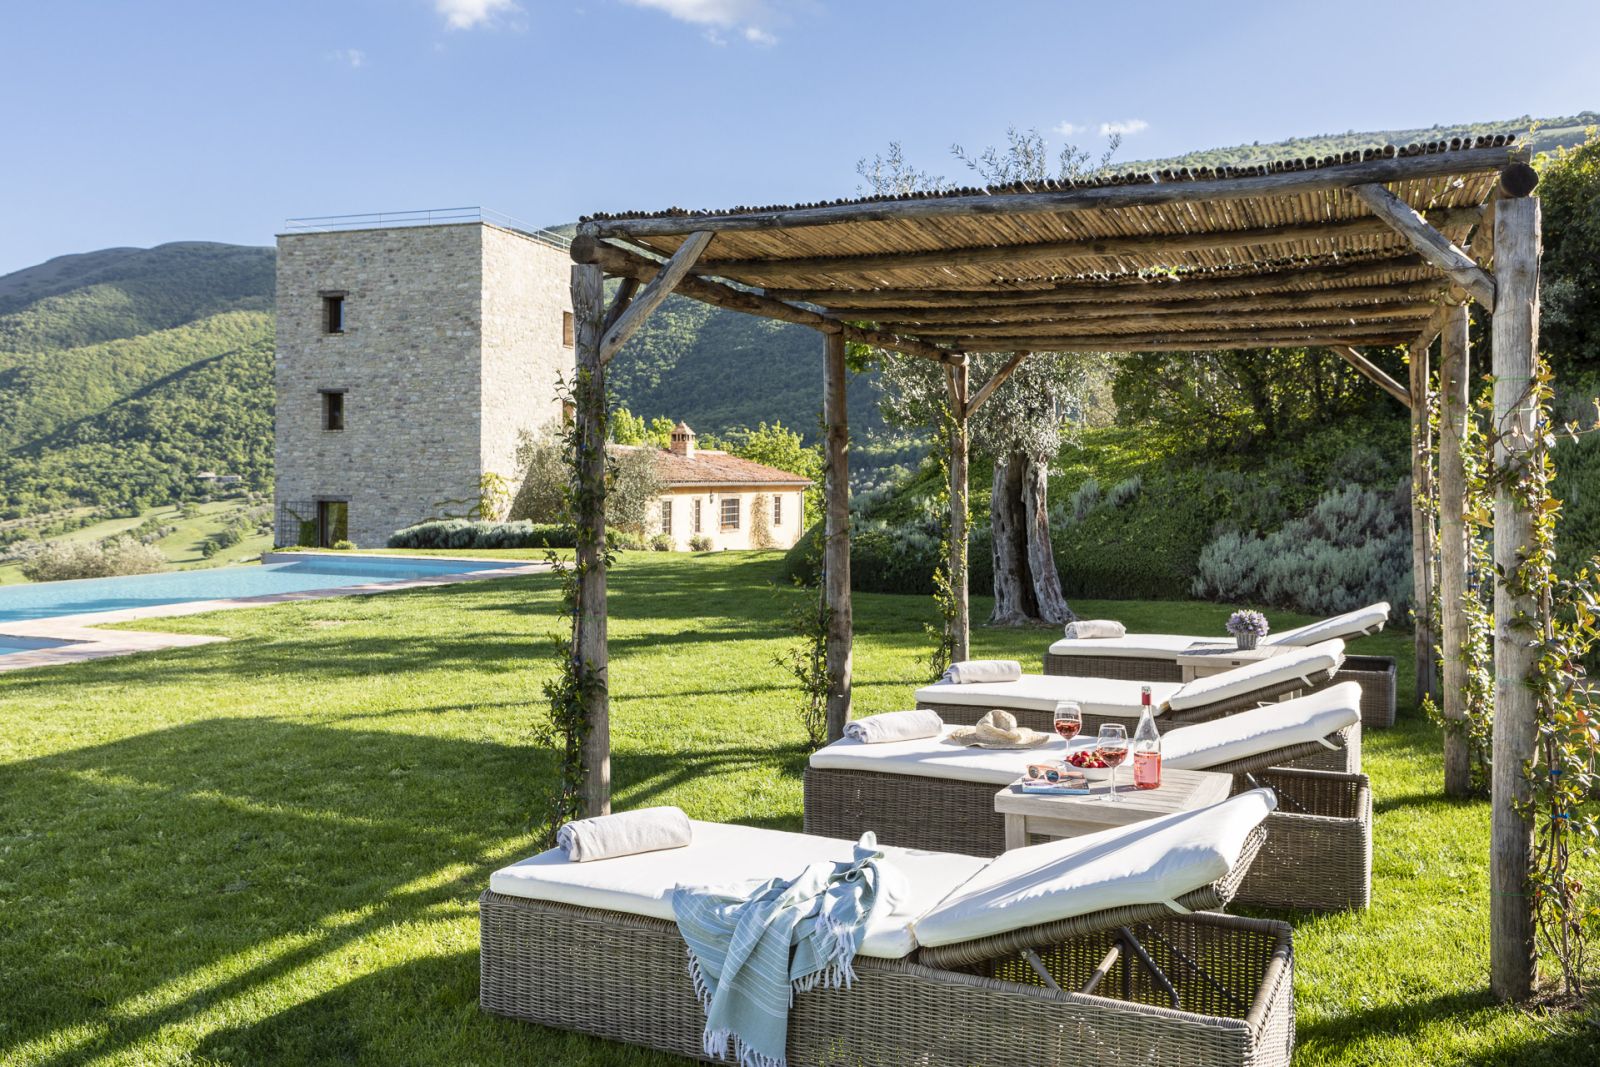 Sun loungers at Bel Canto, Umbria 